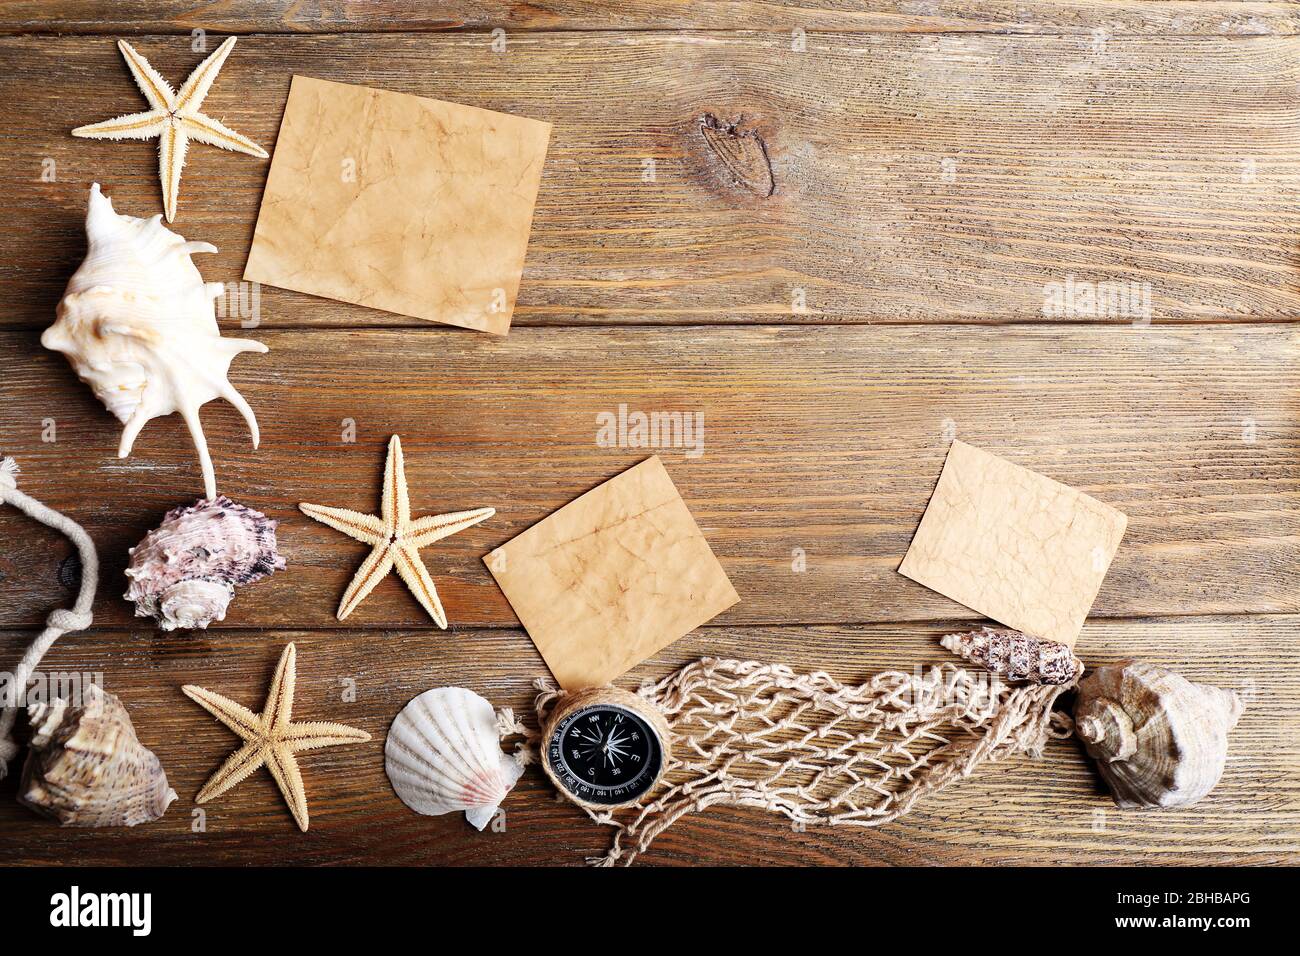 Card blanks with sea stars and shells on wooden background Stock Photo